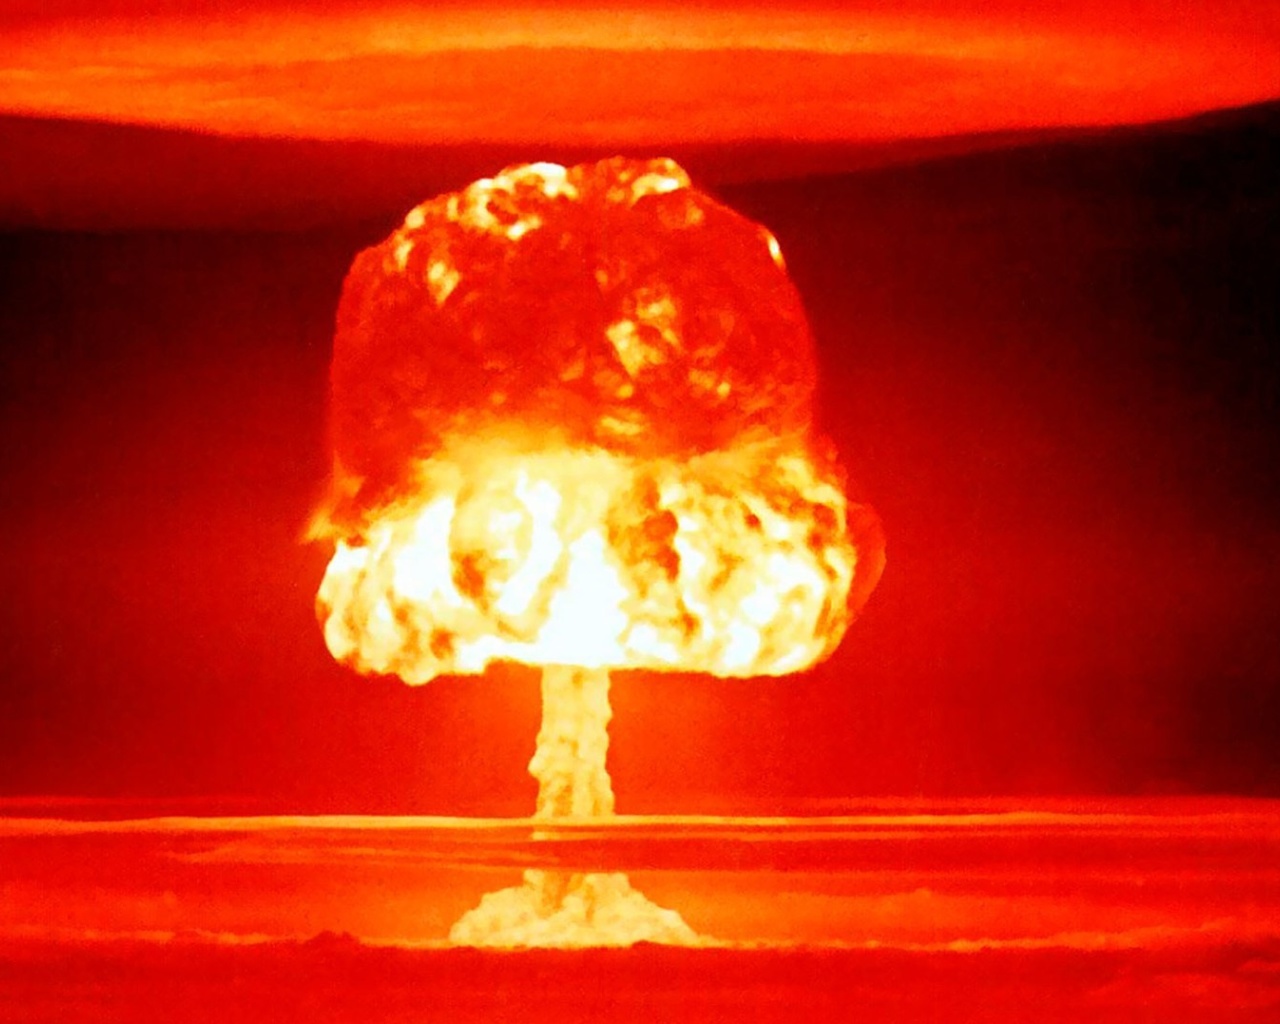 Nuclear explosion wallpaper 1280x1024